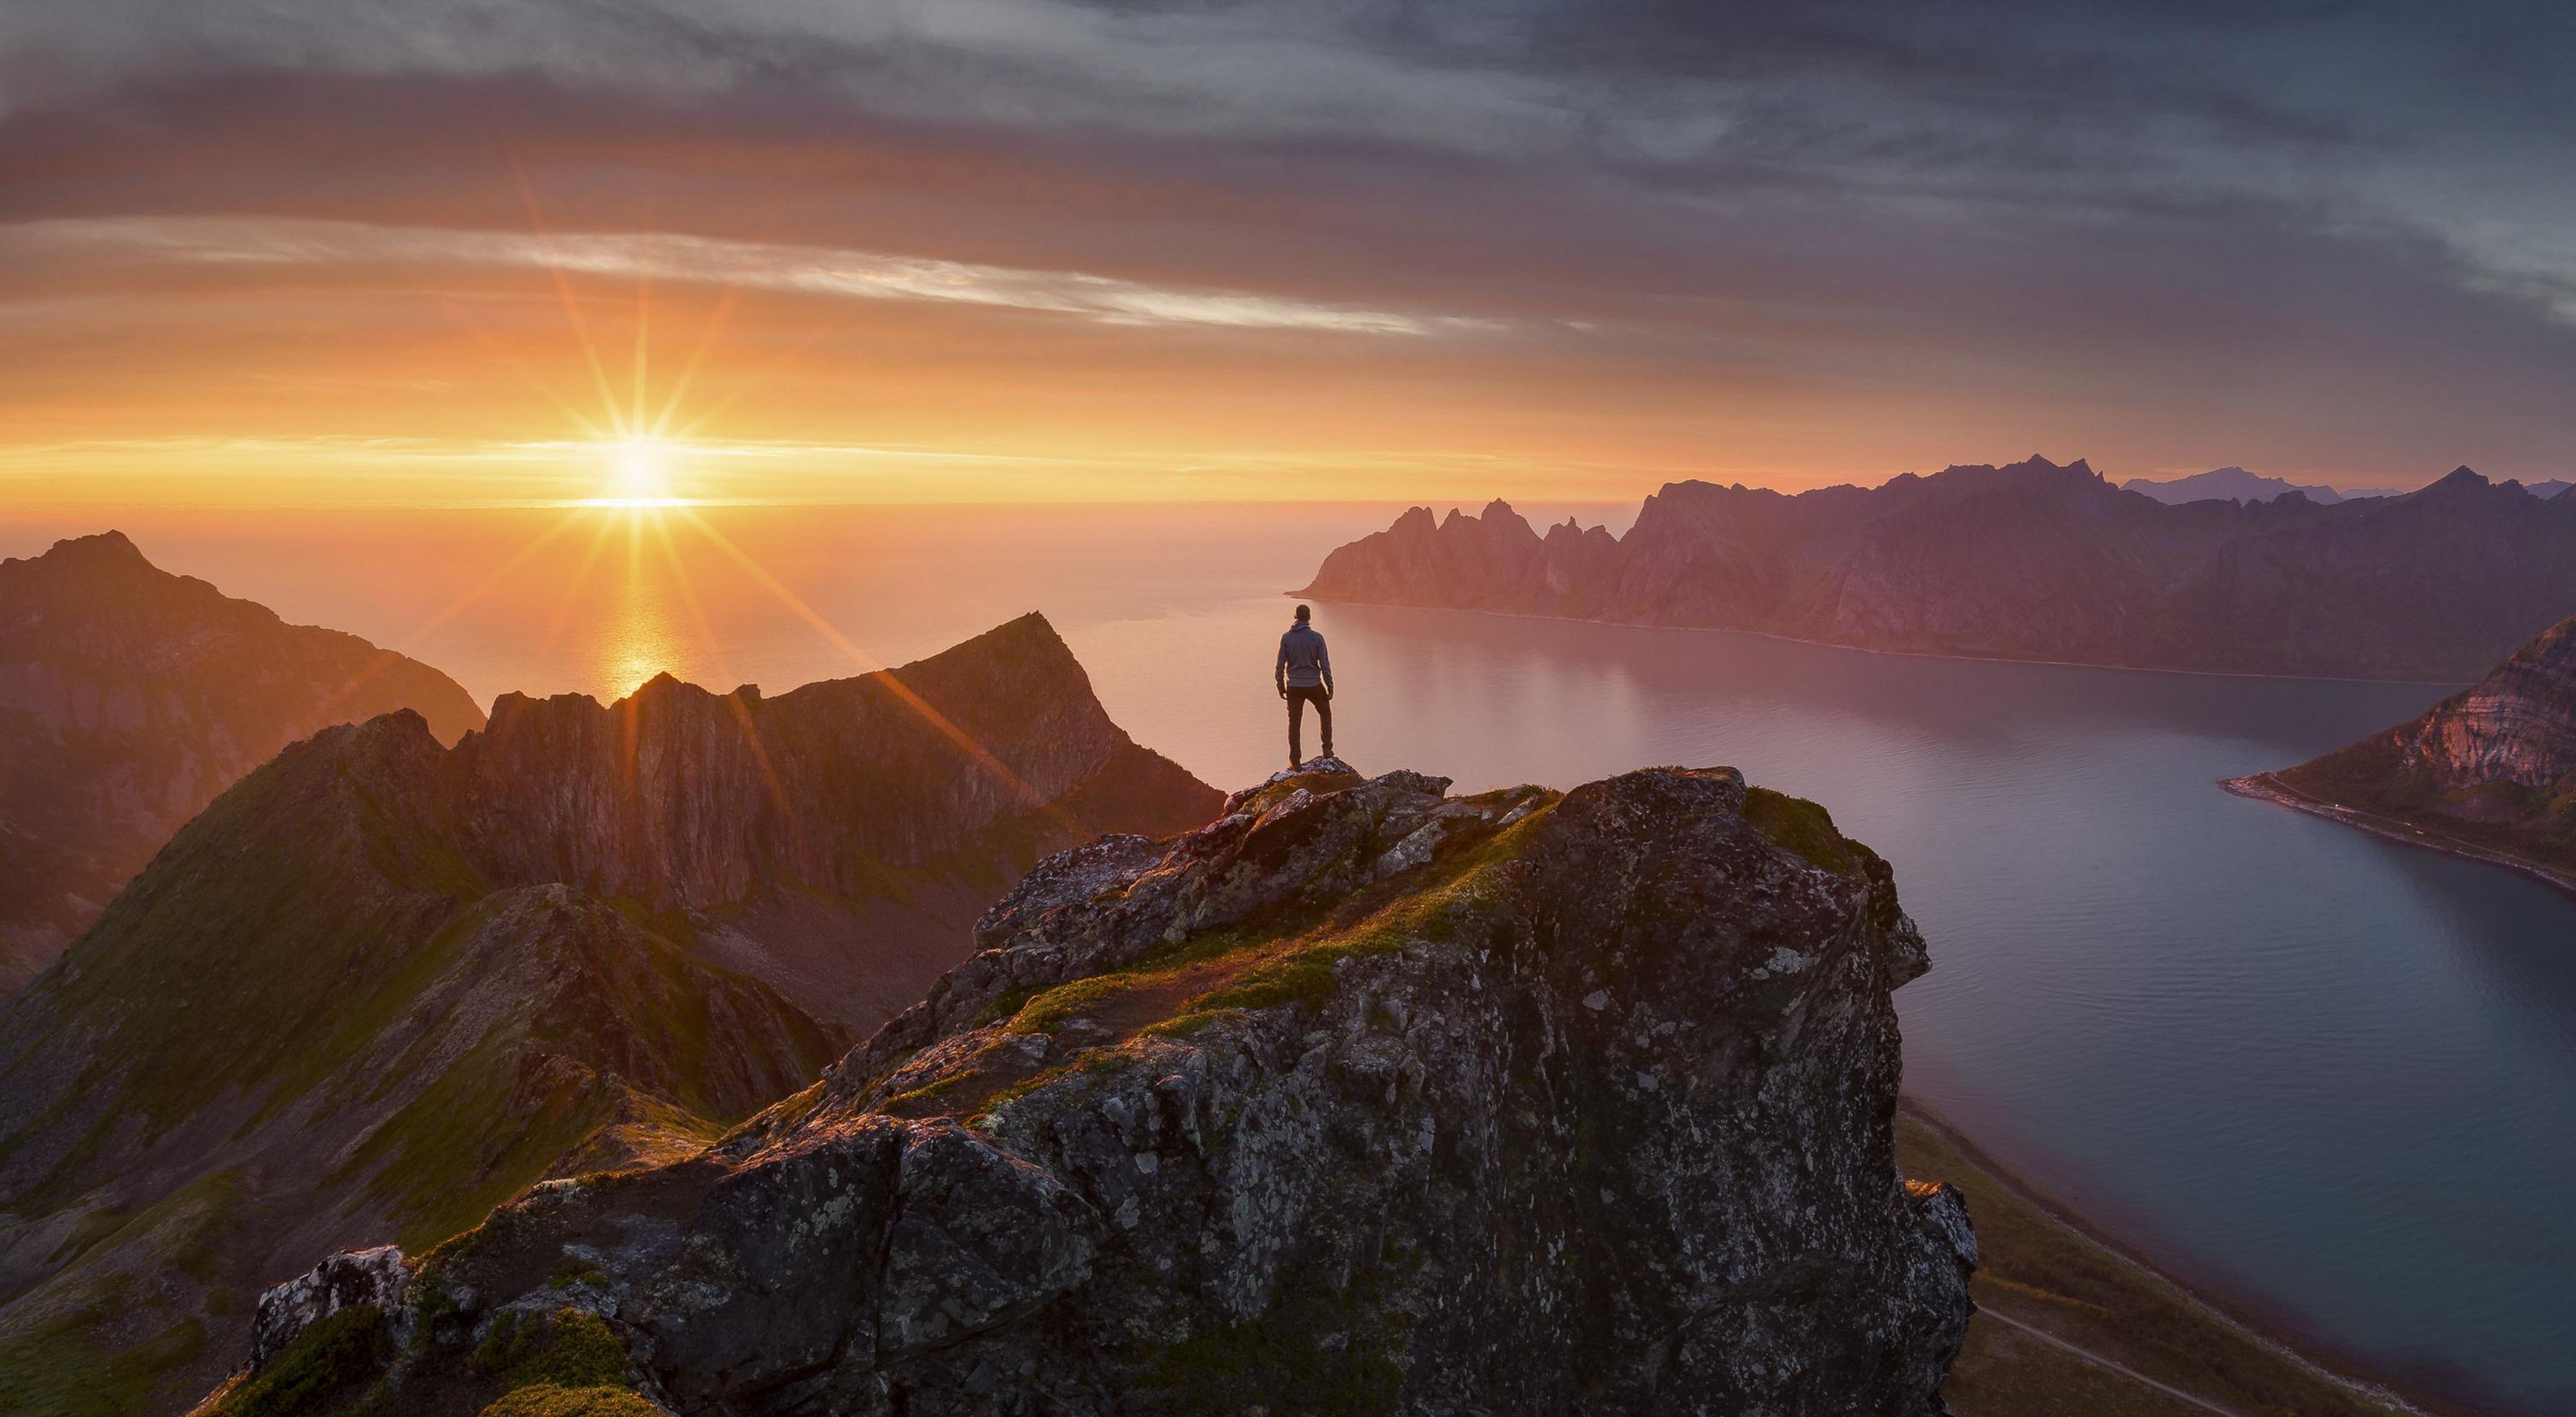 A self portrait taken from Senja in Northern Norway during a midnight sun.